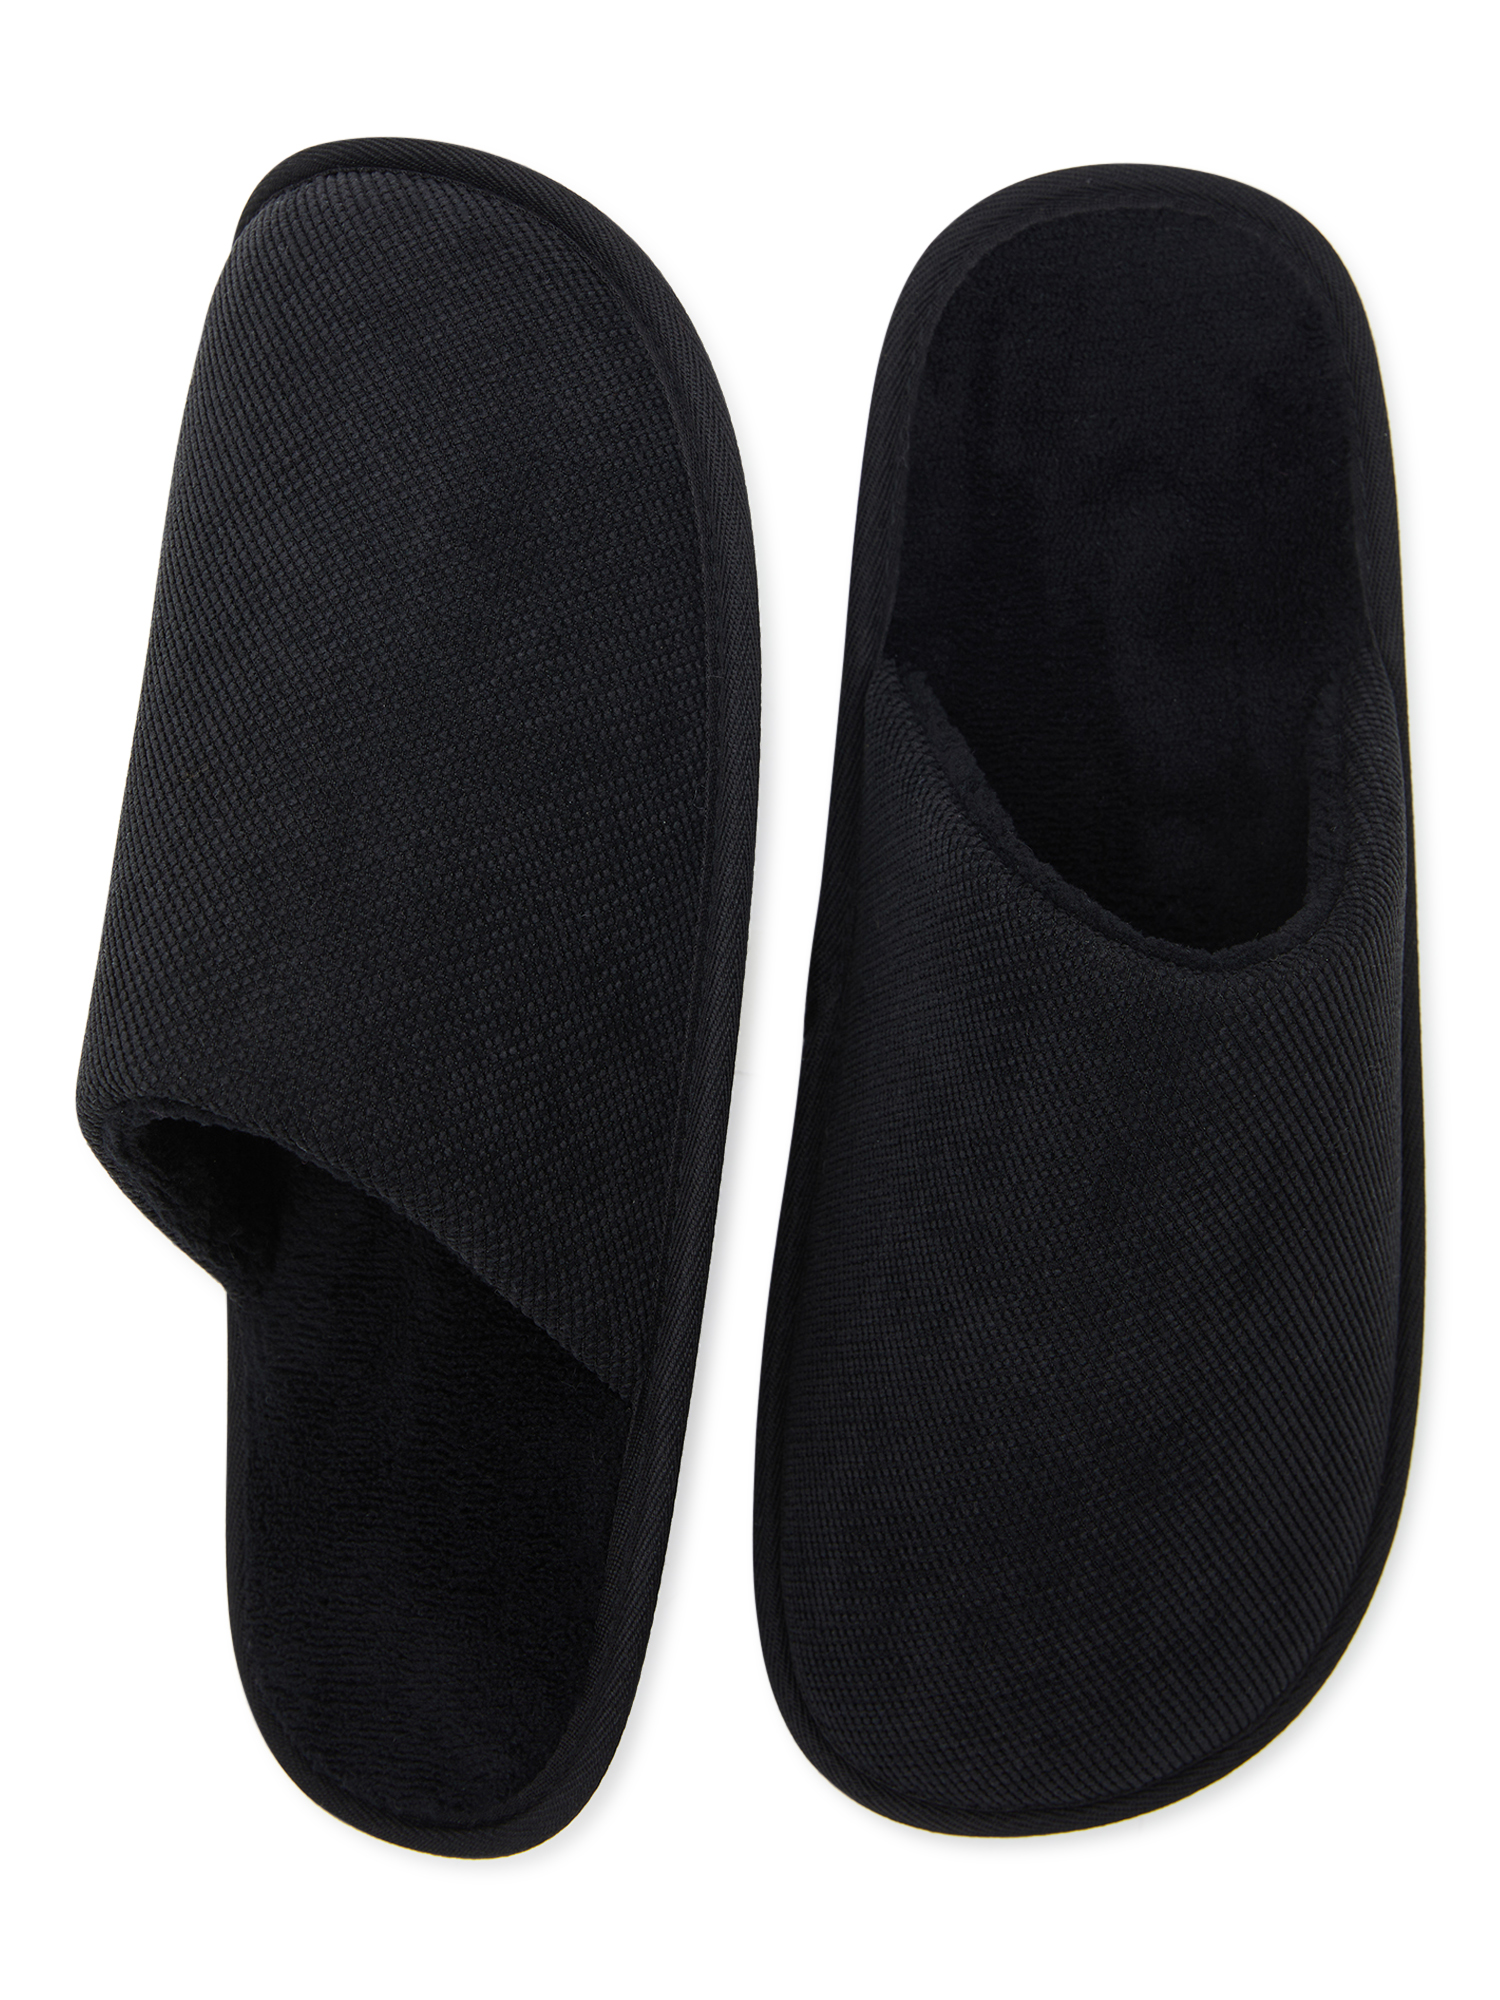 George Men's Casual Scuff Slippers - image 1 of 4